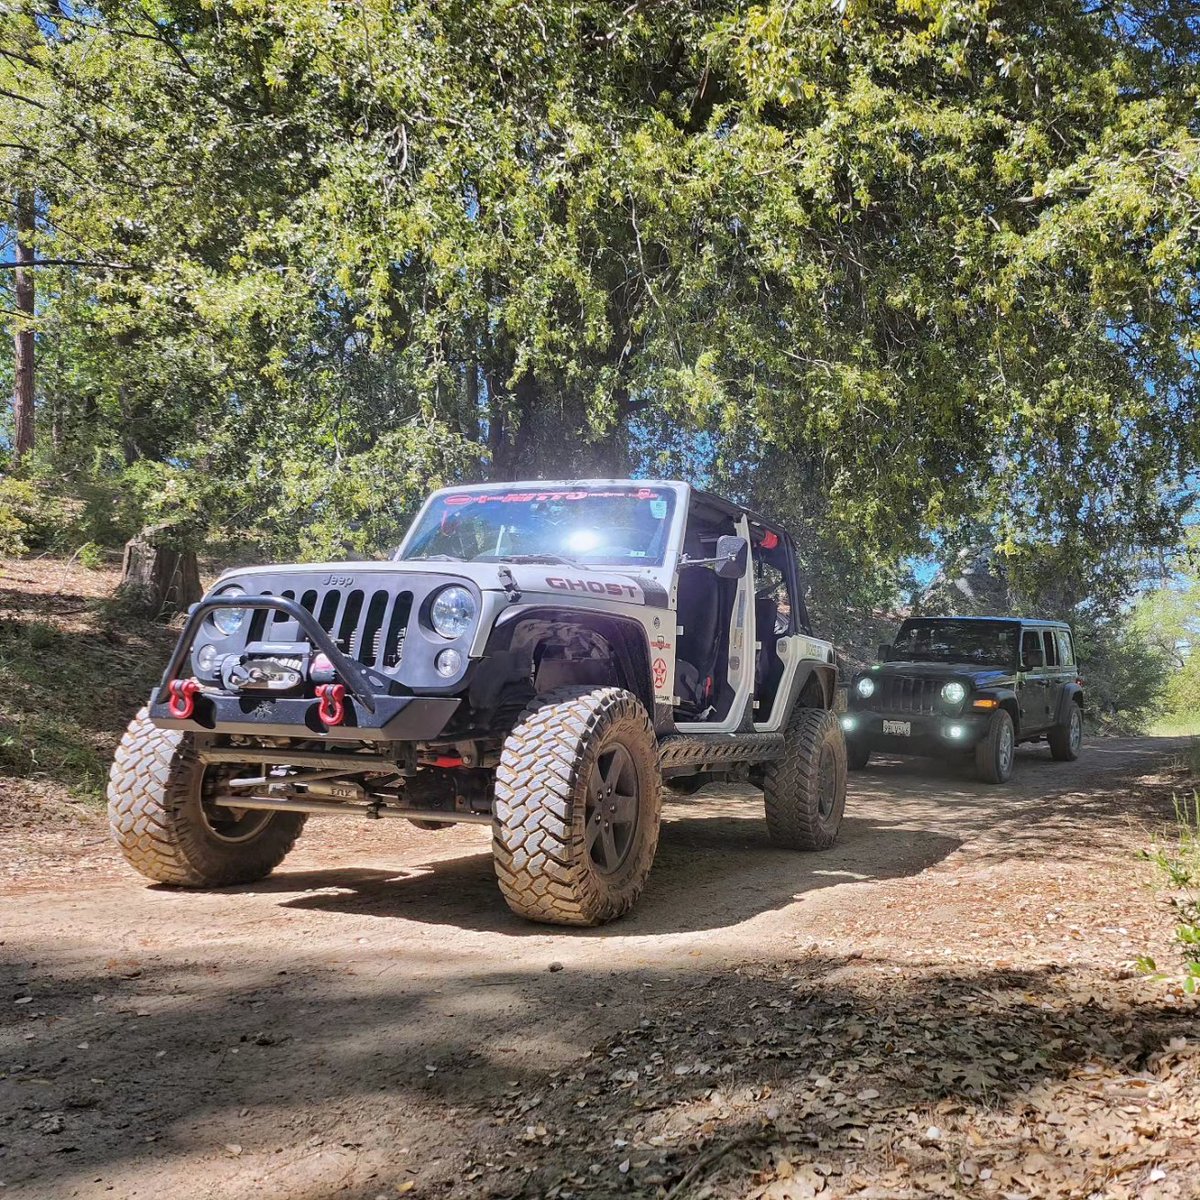 Camping & Mellow rides through Idyllwild with family & great friends!

#Jeep #Jeepers #JeepWave #JeepLife #NittoTires #OffRoad #Adventures

_OIIIIIIIO_
@Jeep | @THEJeepMafia | @NittoTire | @onXmaps | @2fingeredsocie1